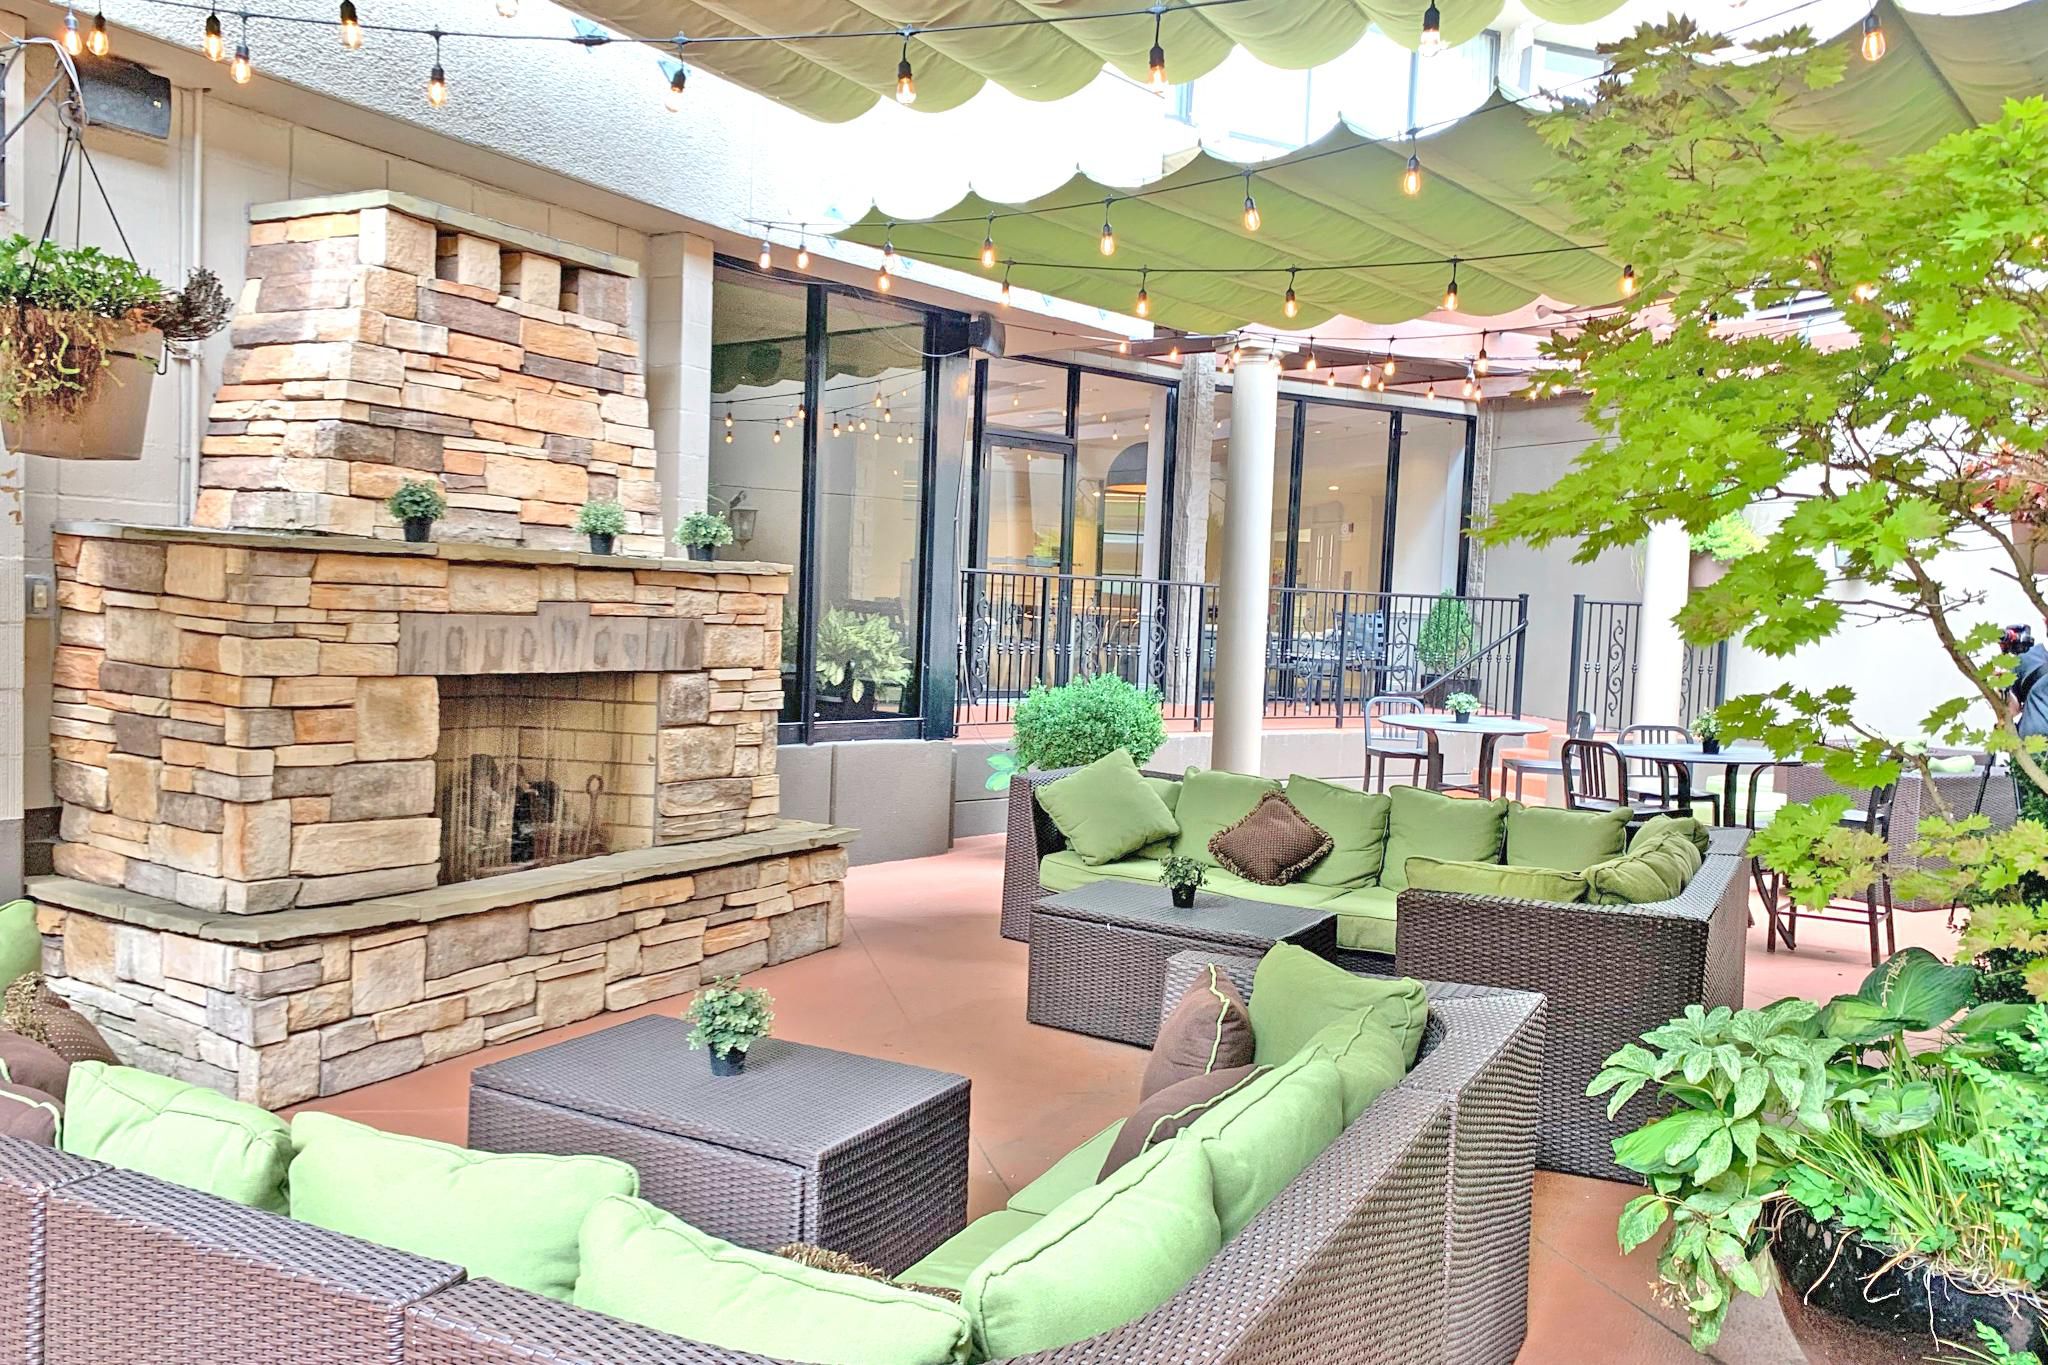 Relax on our Fireside Plaza, the perfect place to meet and unwind.